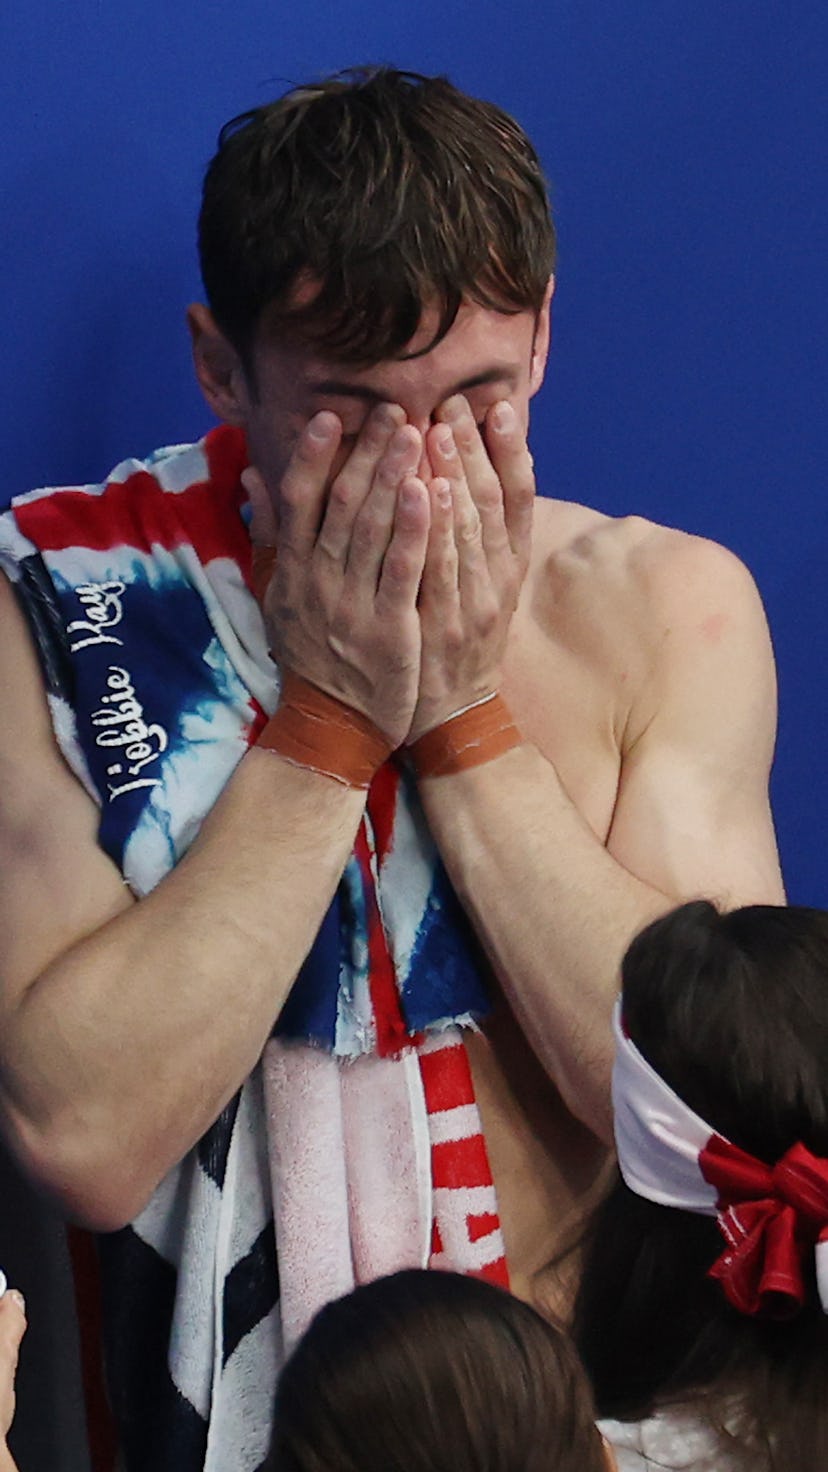 Tom Daley of Team Great Britain celebrates after winning gold.